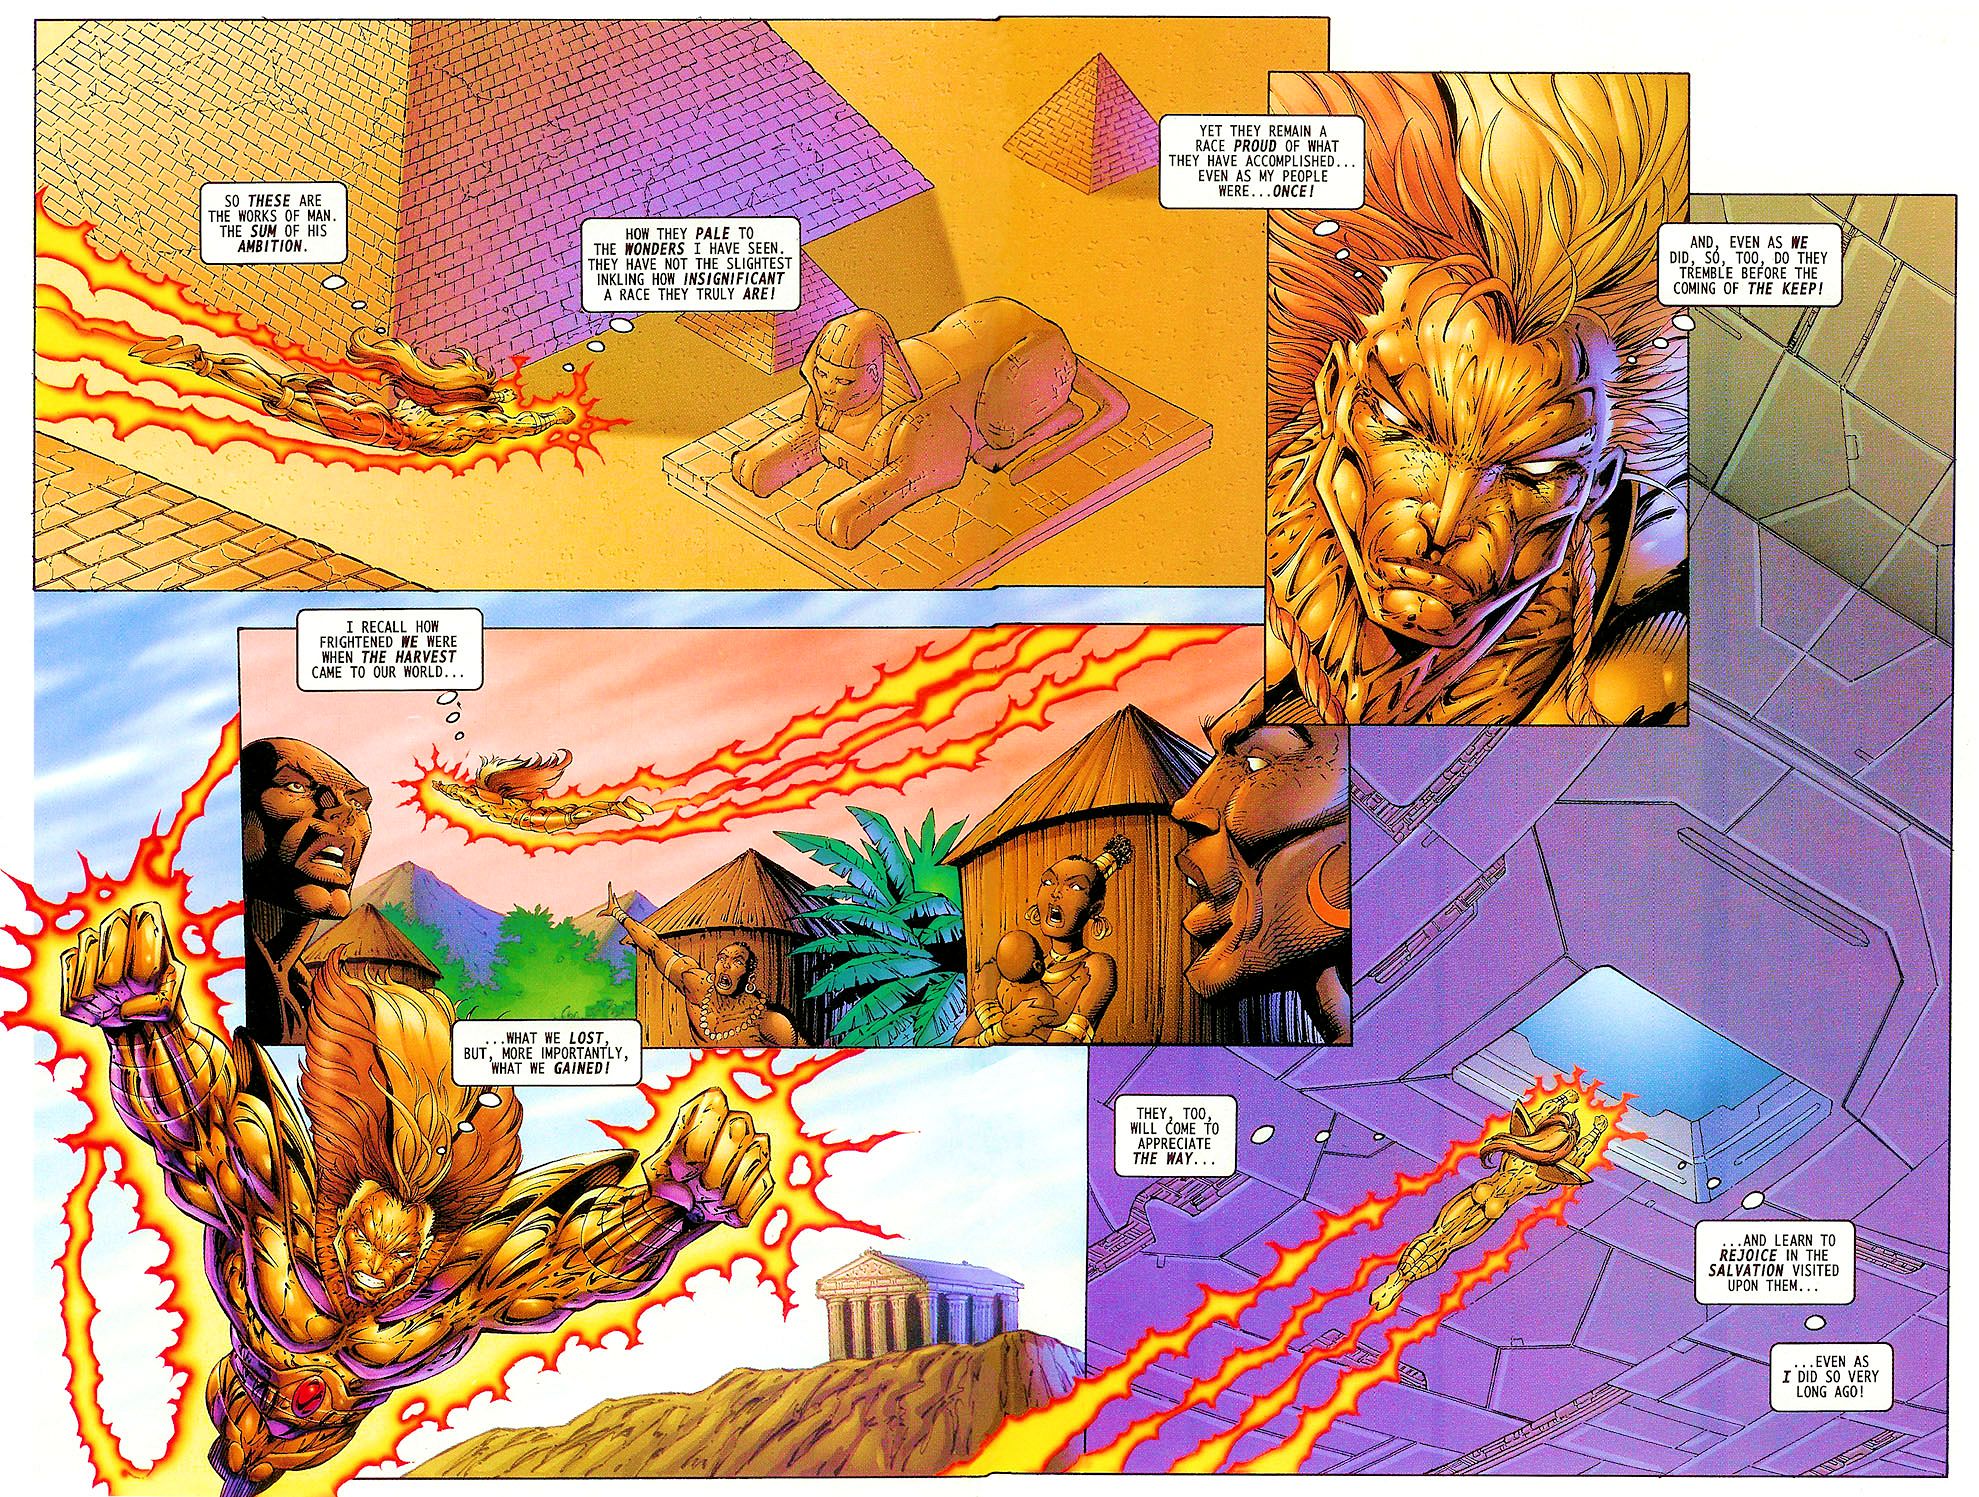 Read online Extreme Destroyer comic -  Issue # Issue Prologue - 8